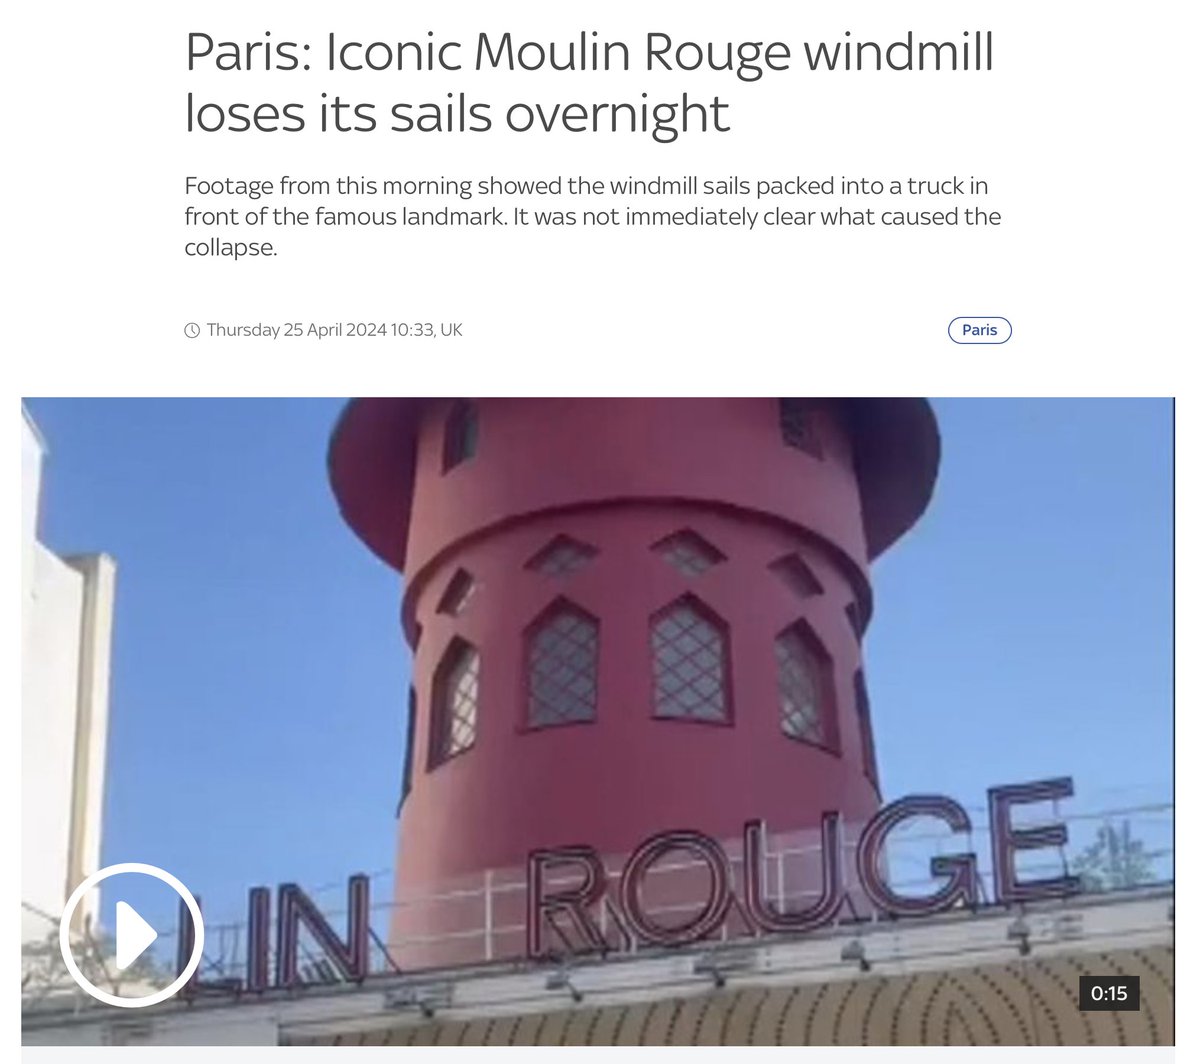 Yesterday: A white horse covered in blood gallops through the streets of London. The clock of Big Ben freezes at 9am.

This morning: The sails of the Moulin Rouge windmill inexplicably collapse for the first time in 135 years.

Tomorrow: Look out for the Star called Wormwood,